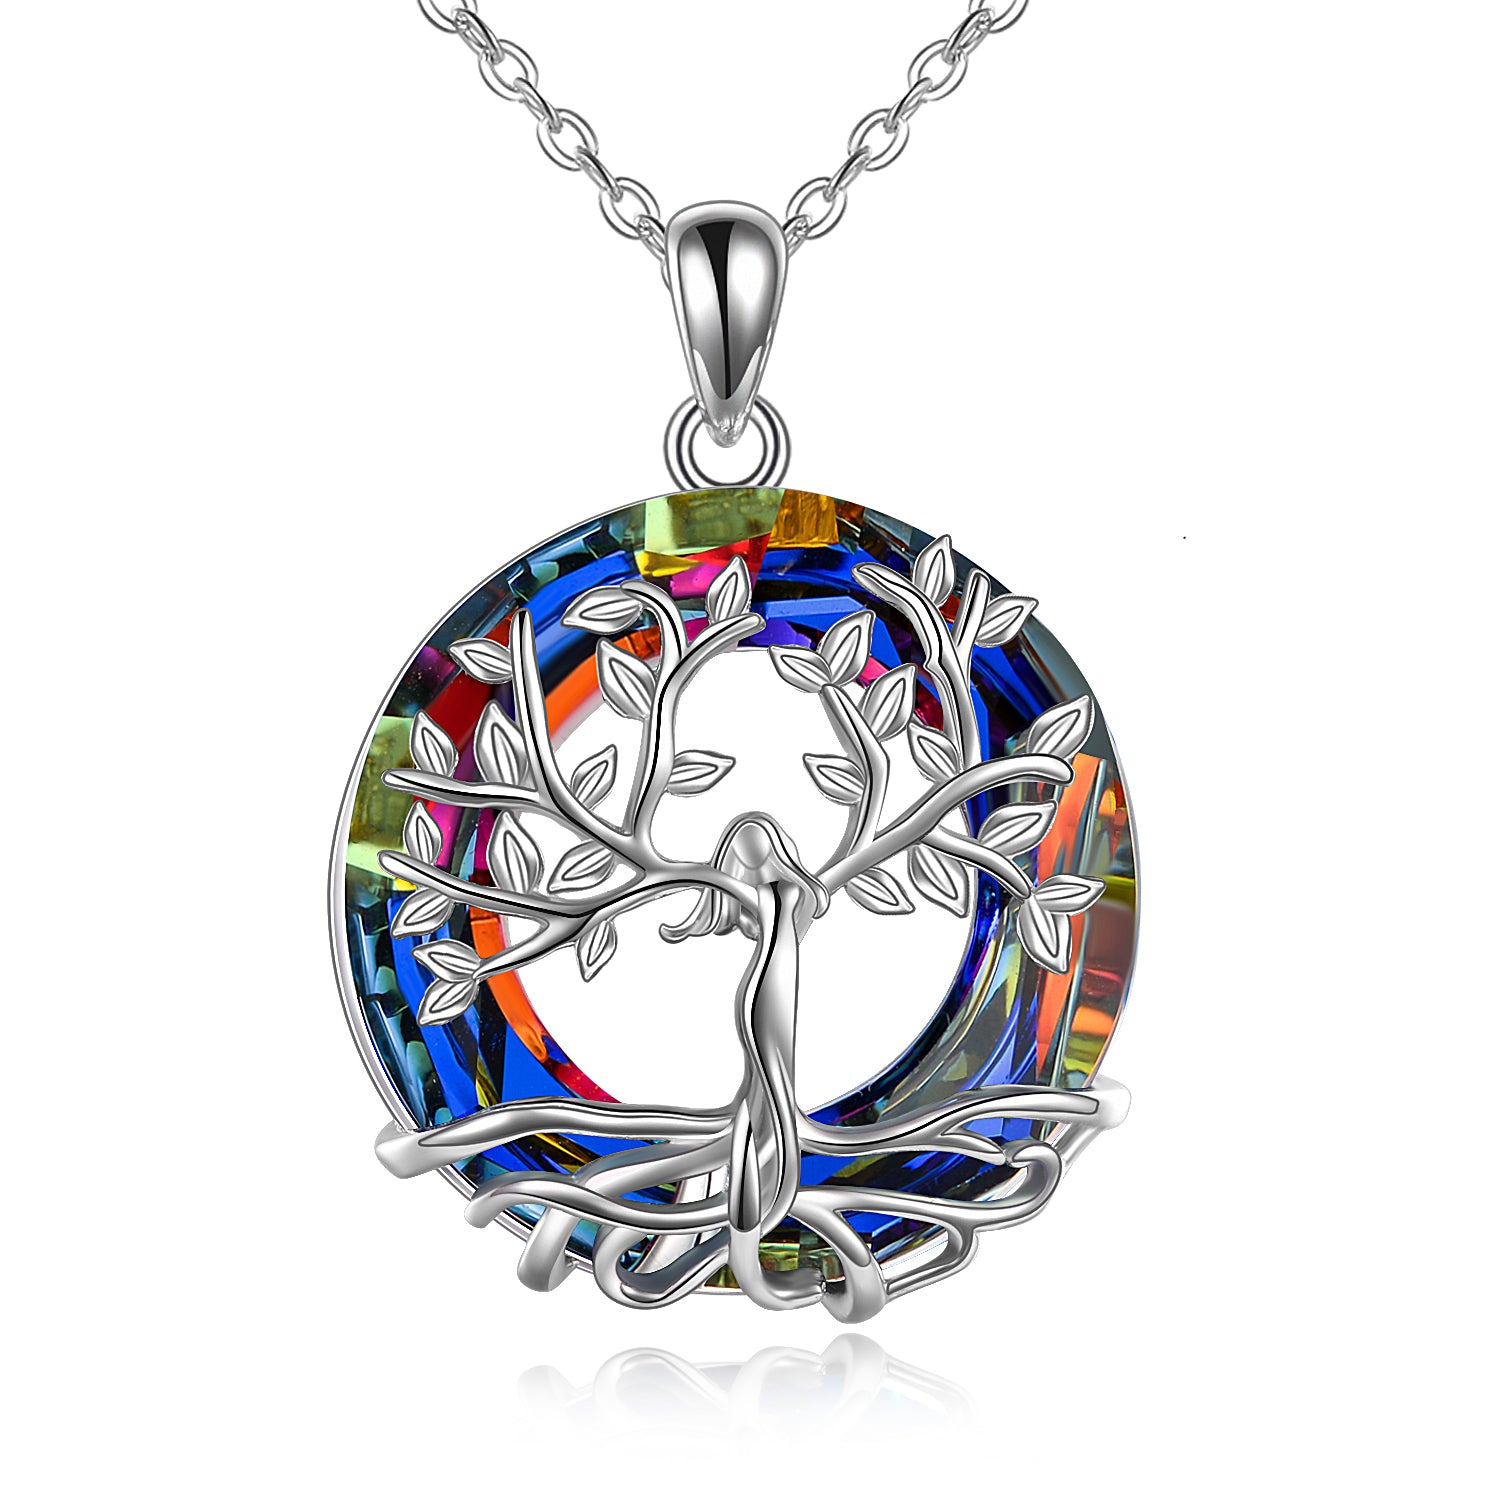 Sterling Silver Tree of Life with Crystal Pendant Necklace Jewelry